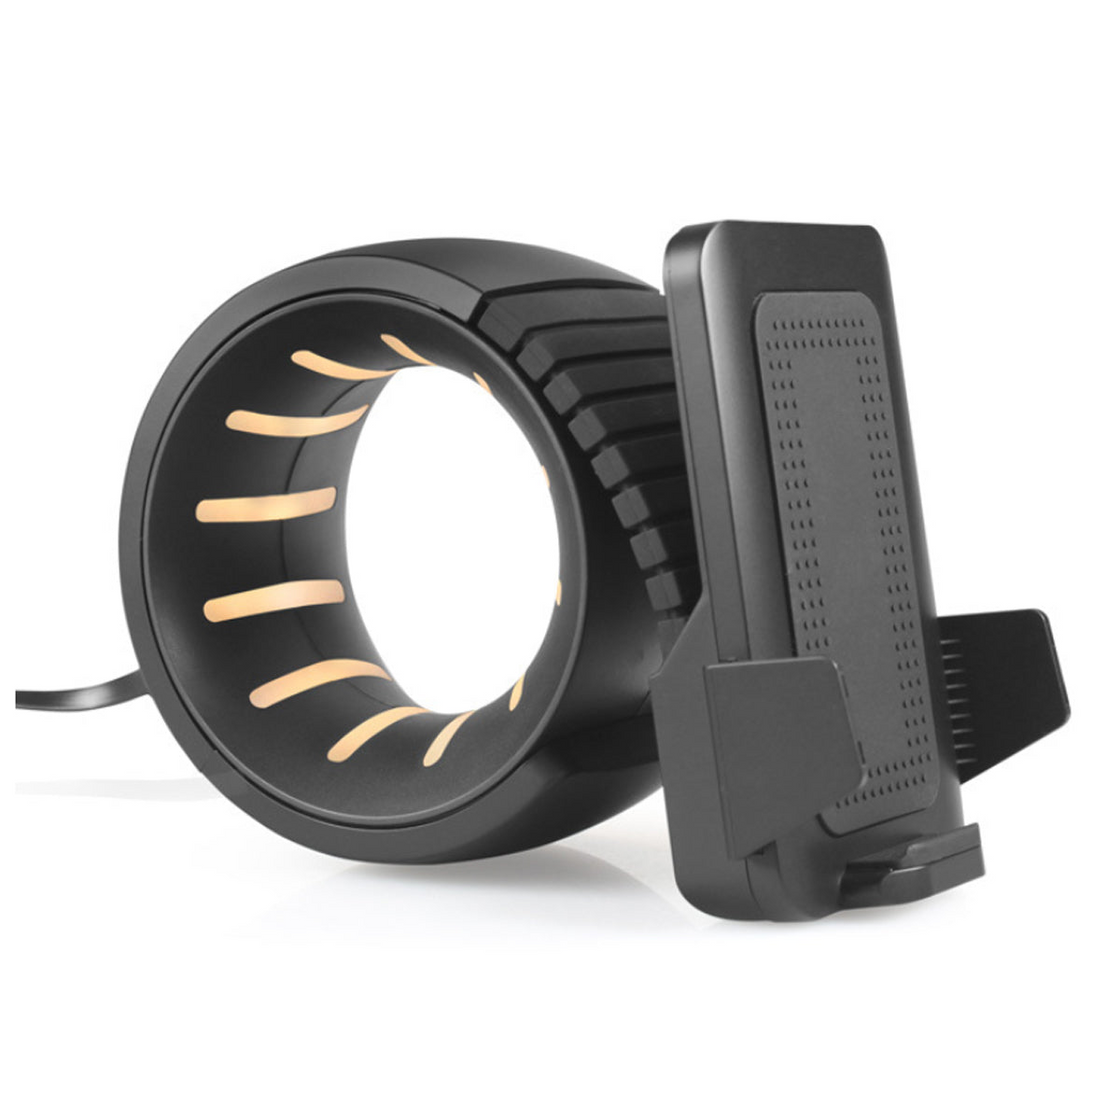 Wheel Of Power Mobile Wireless Charger - Fast 10W Qi-based Charging